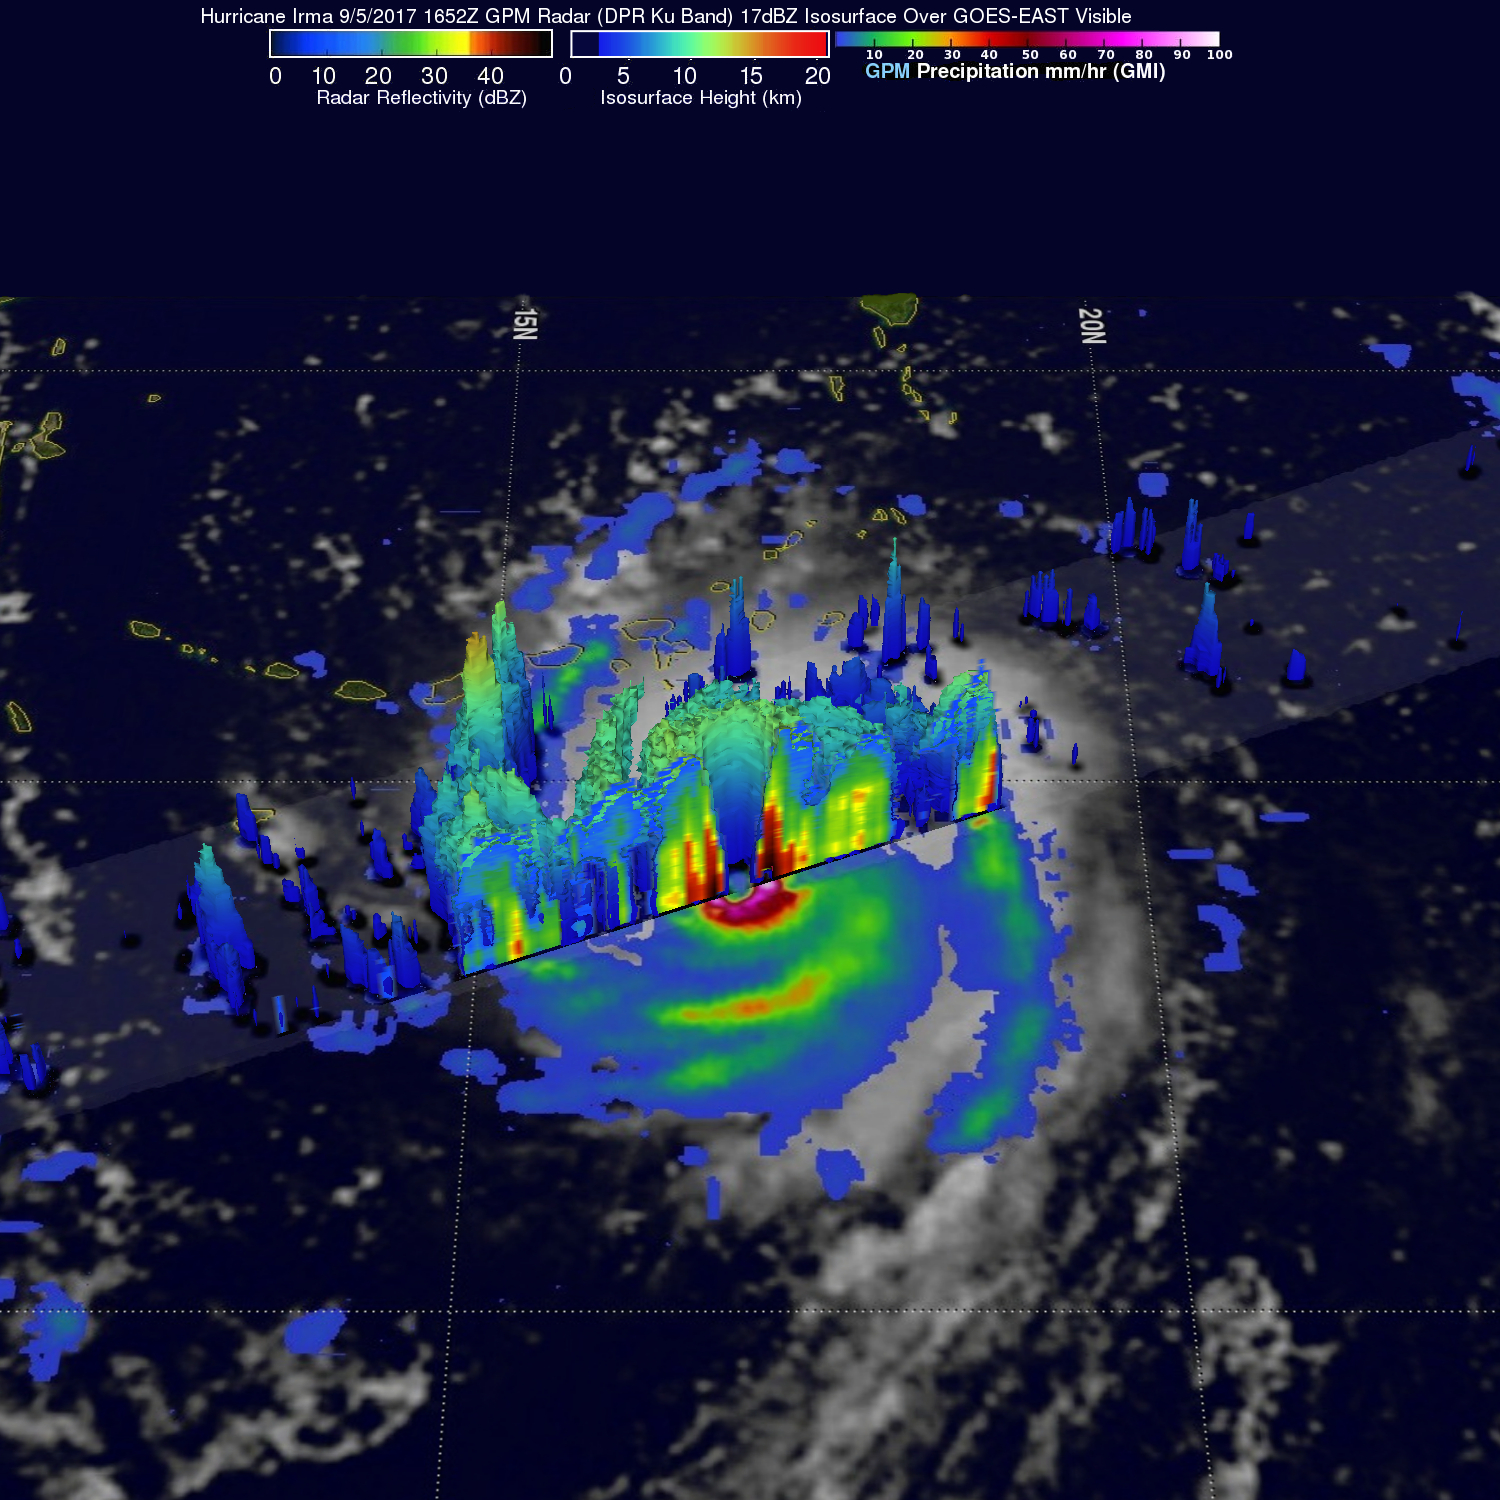 GPM image of Irma, with clouds in 3D colors.